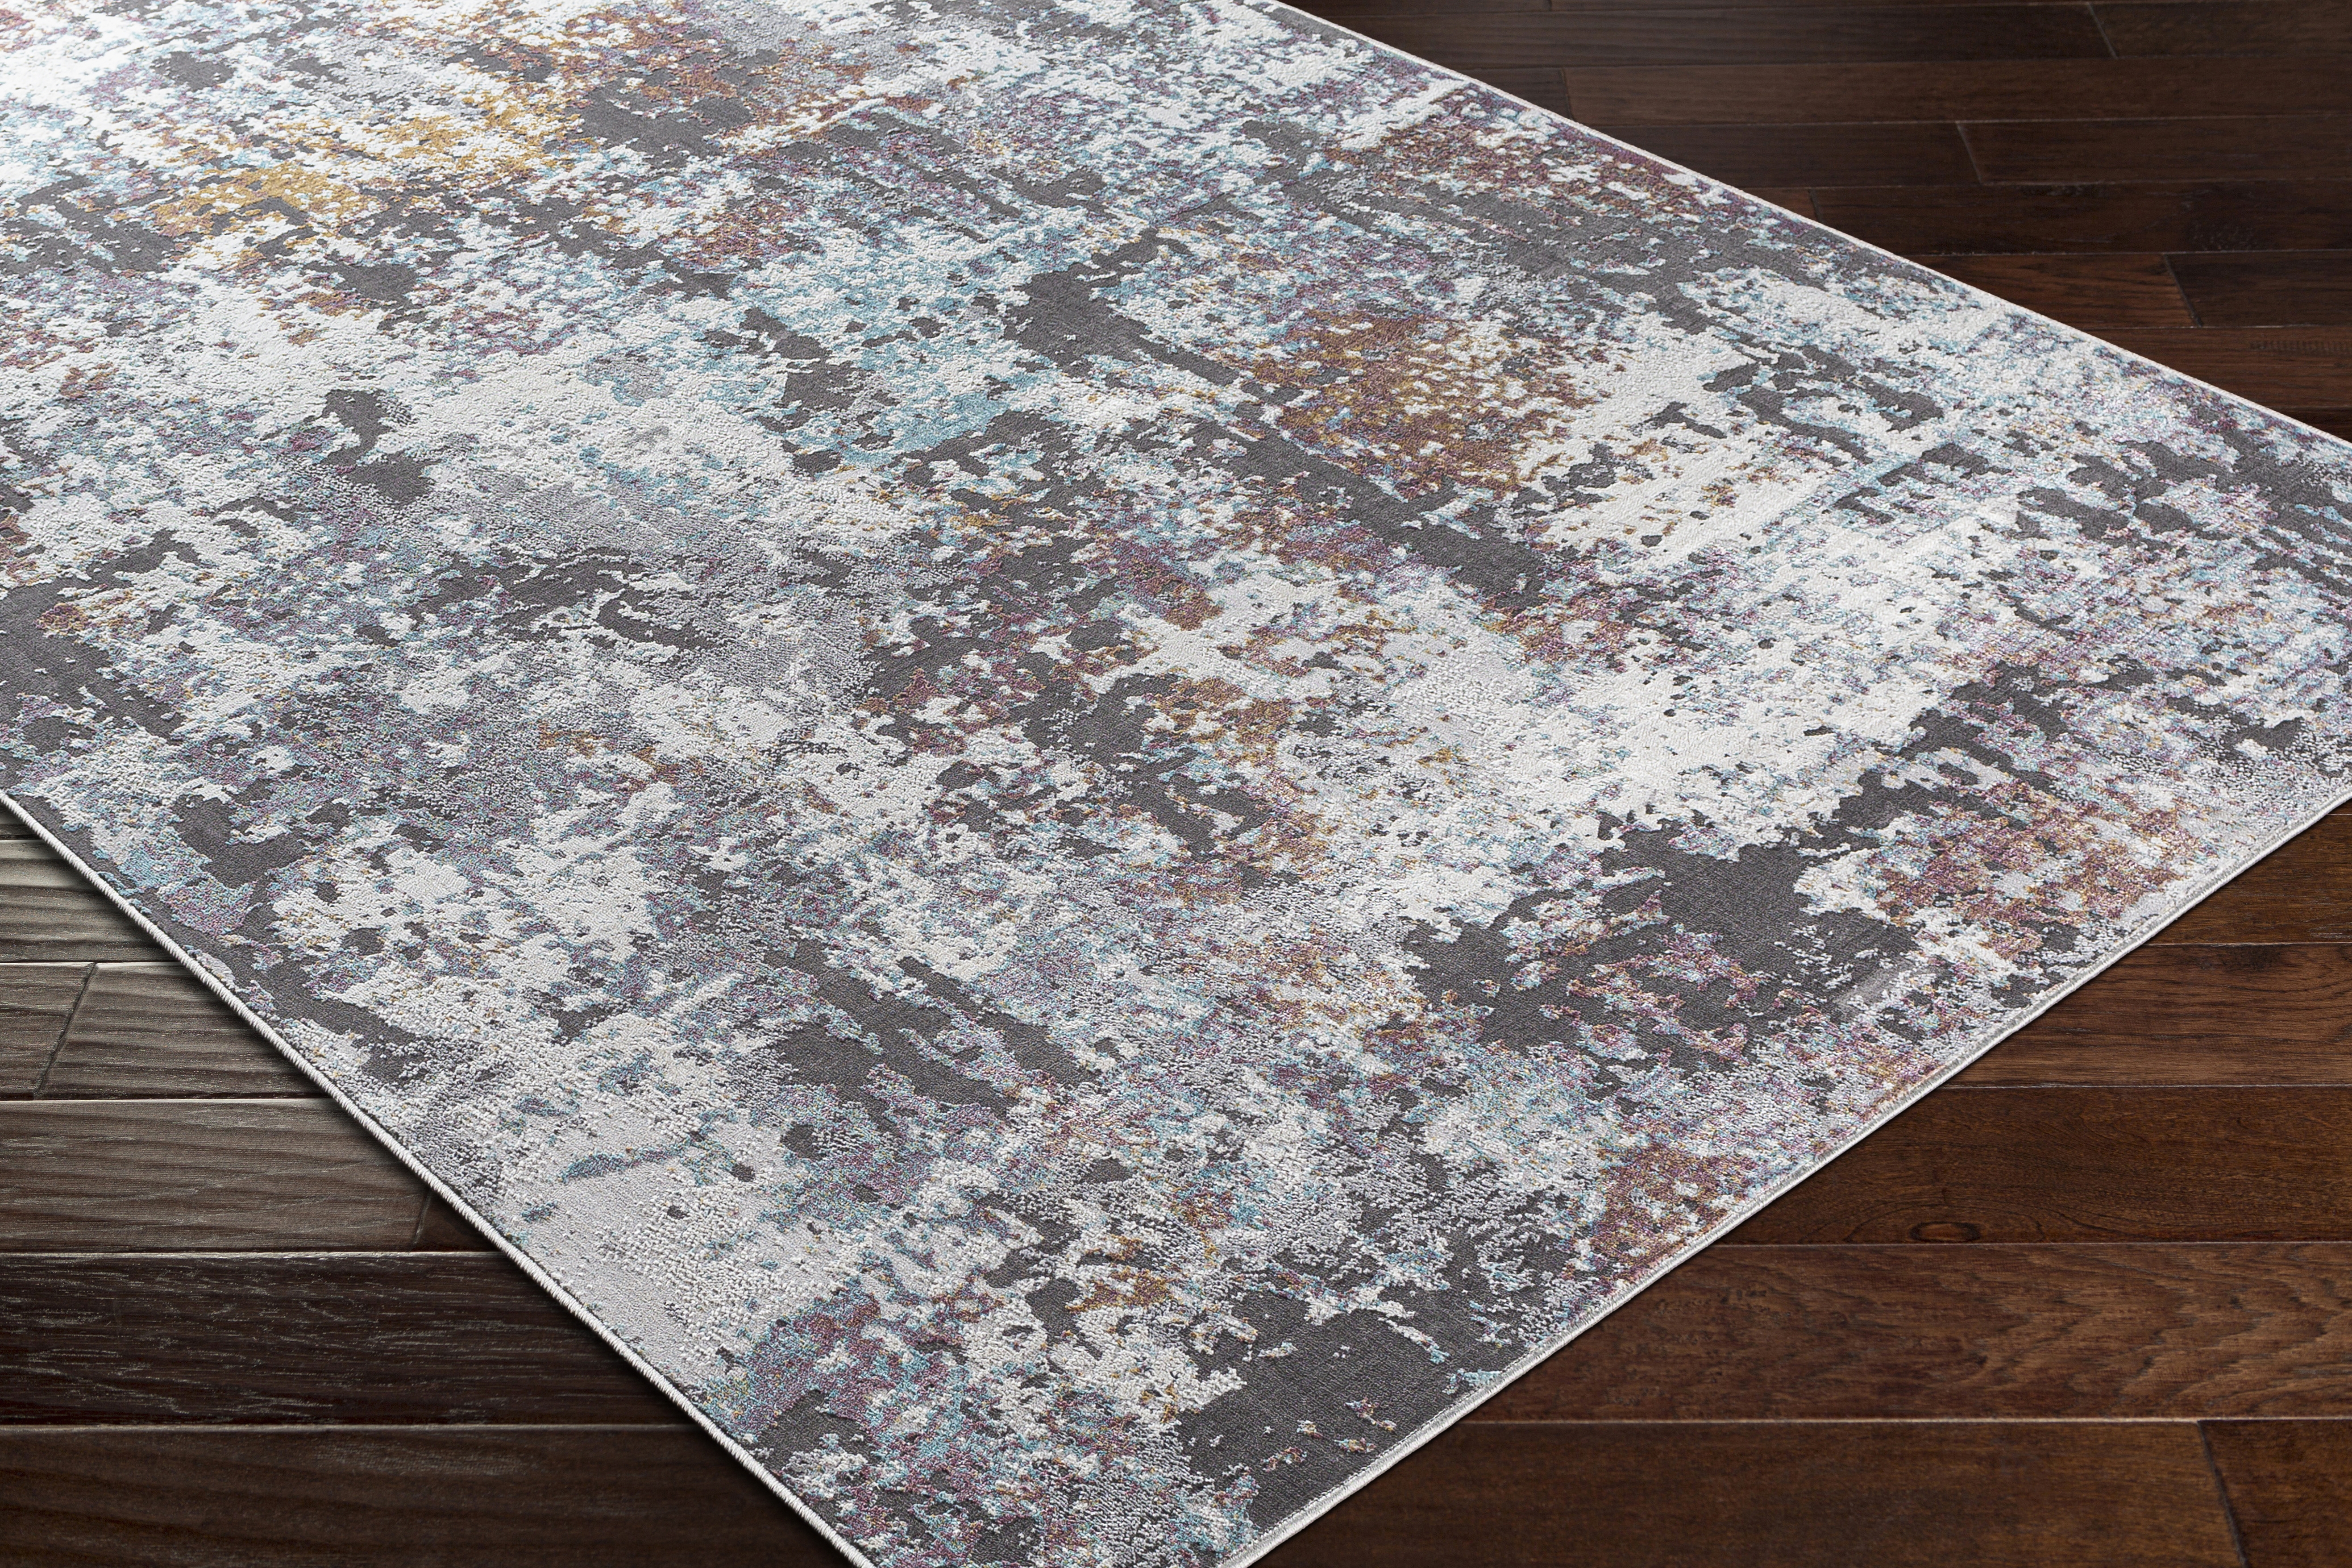 Couture Rug, 7'10" x 10'3" - Image 5